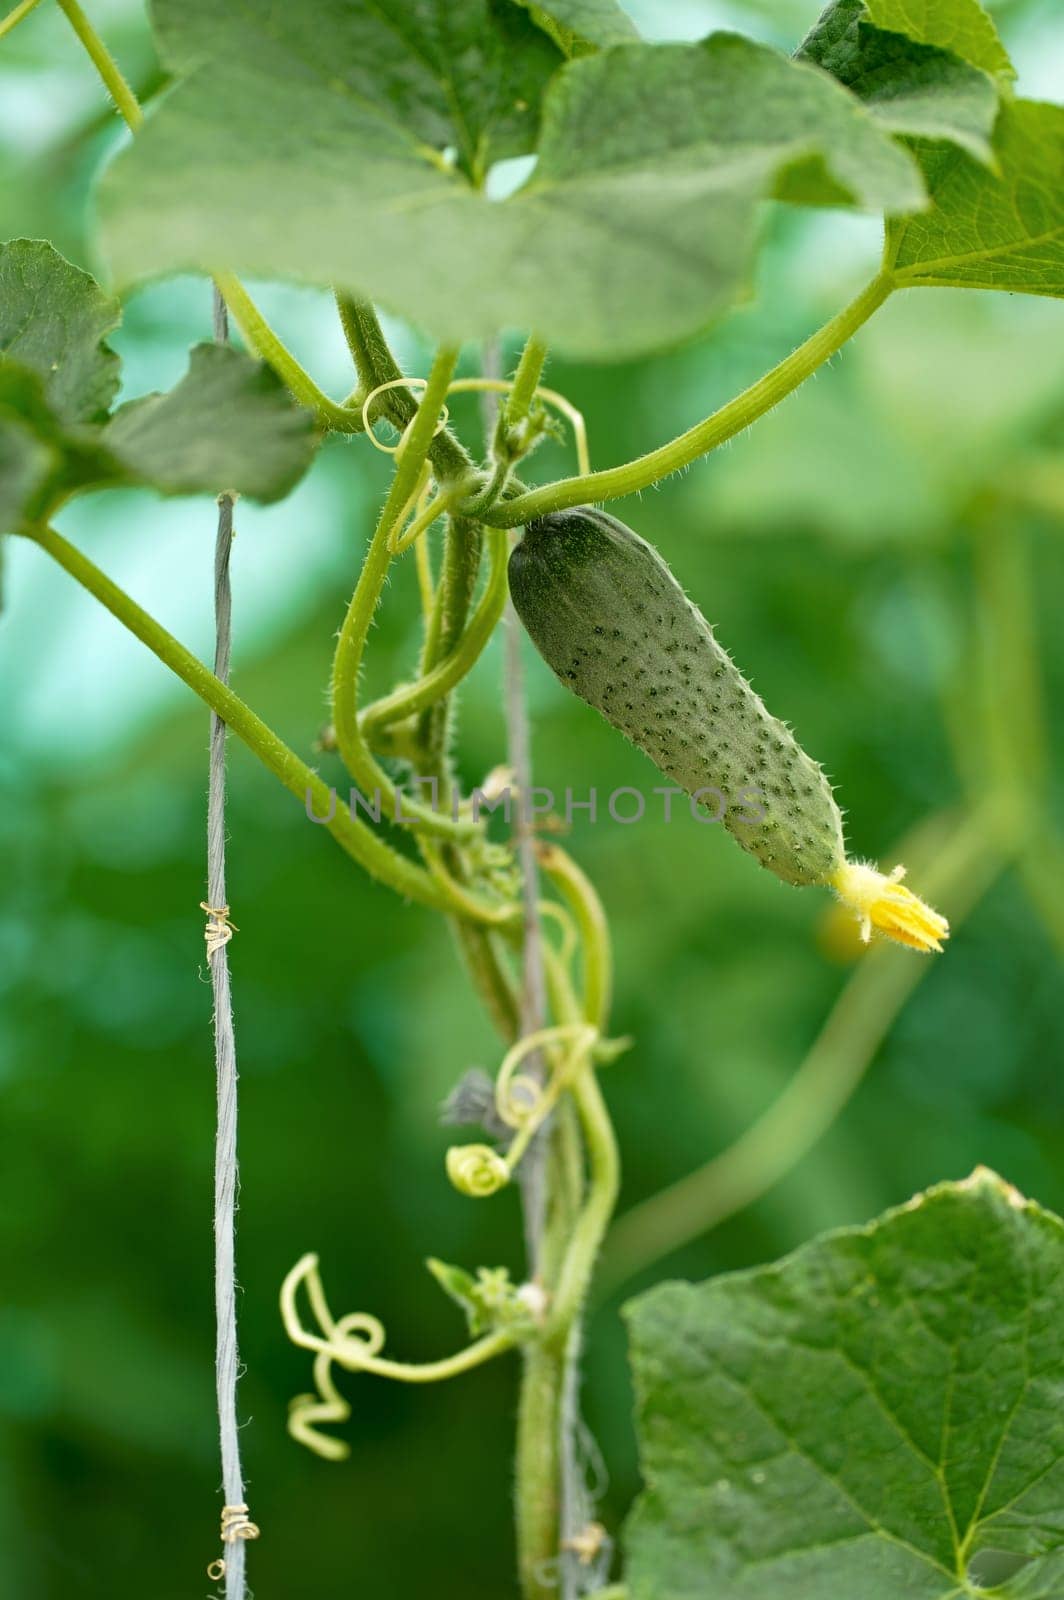 cucumbers ripen in the greenhouse. Home harvest. Harvest in the greenhouse. Homemade vegetables. Cucumbers in the greenhouse. Cucumbers on the branch. by aprilphoto